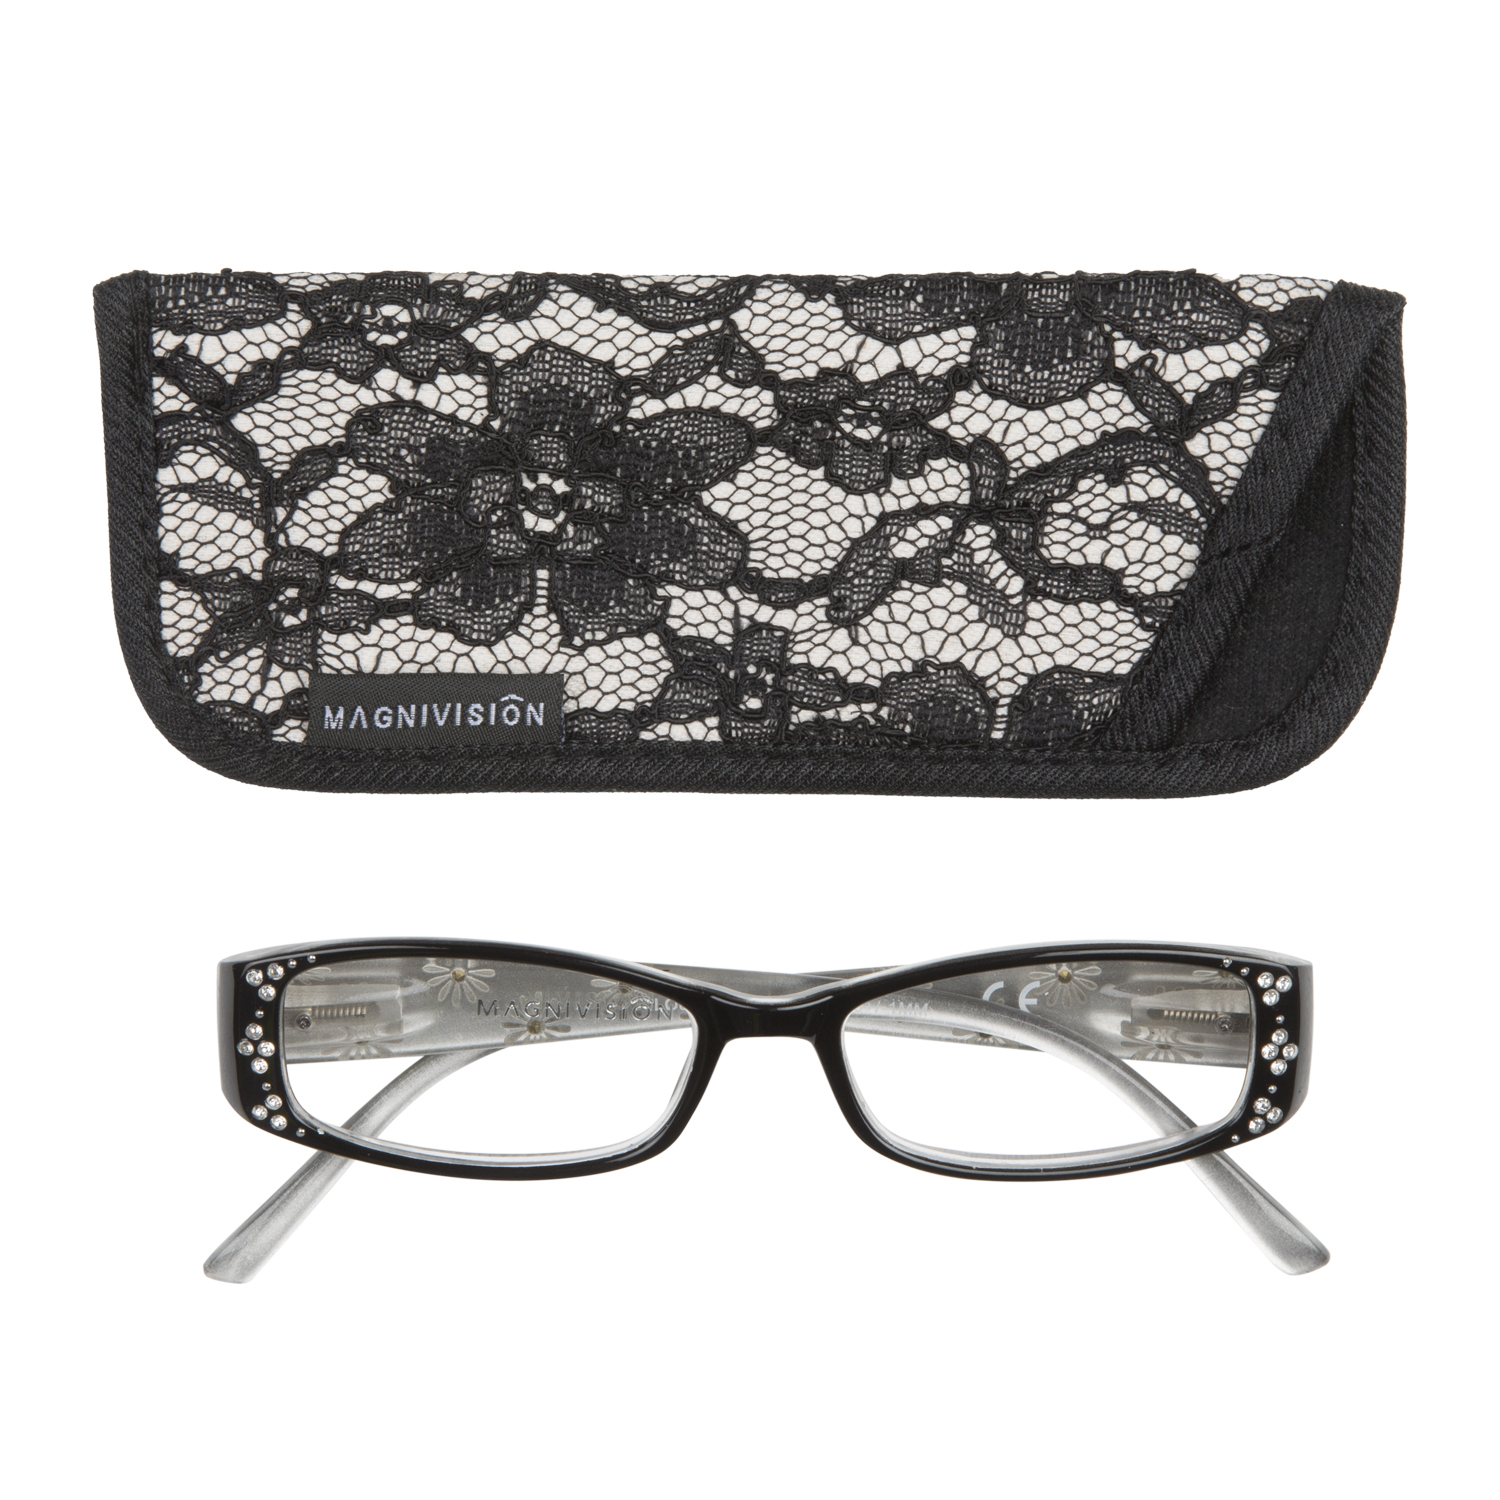 Tilly Magnivision Reading Glasses - 3.00 Image 2